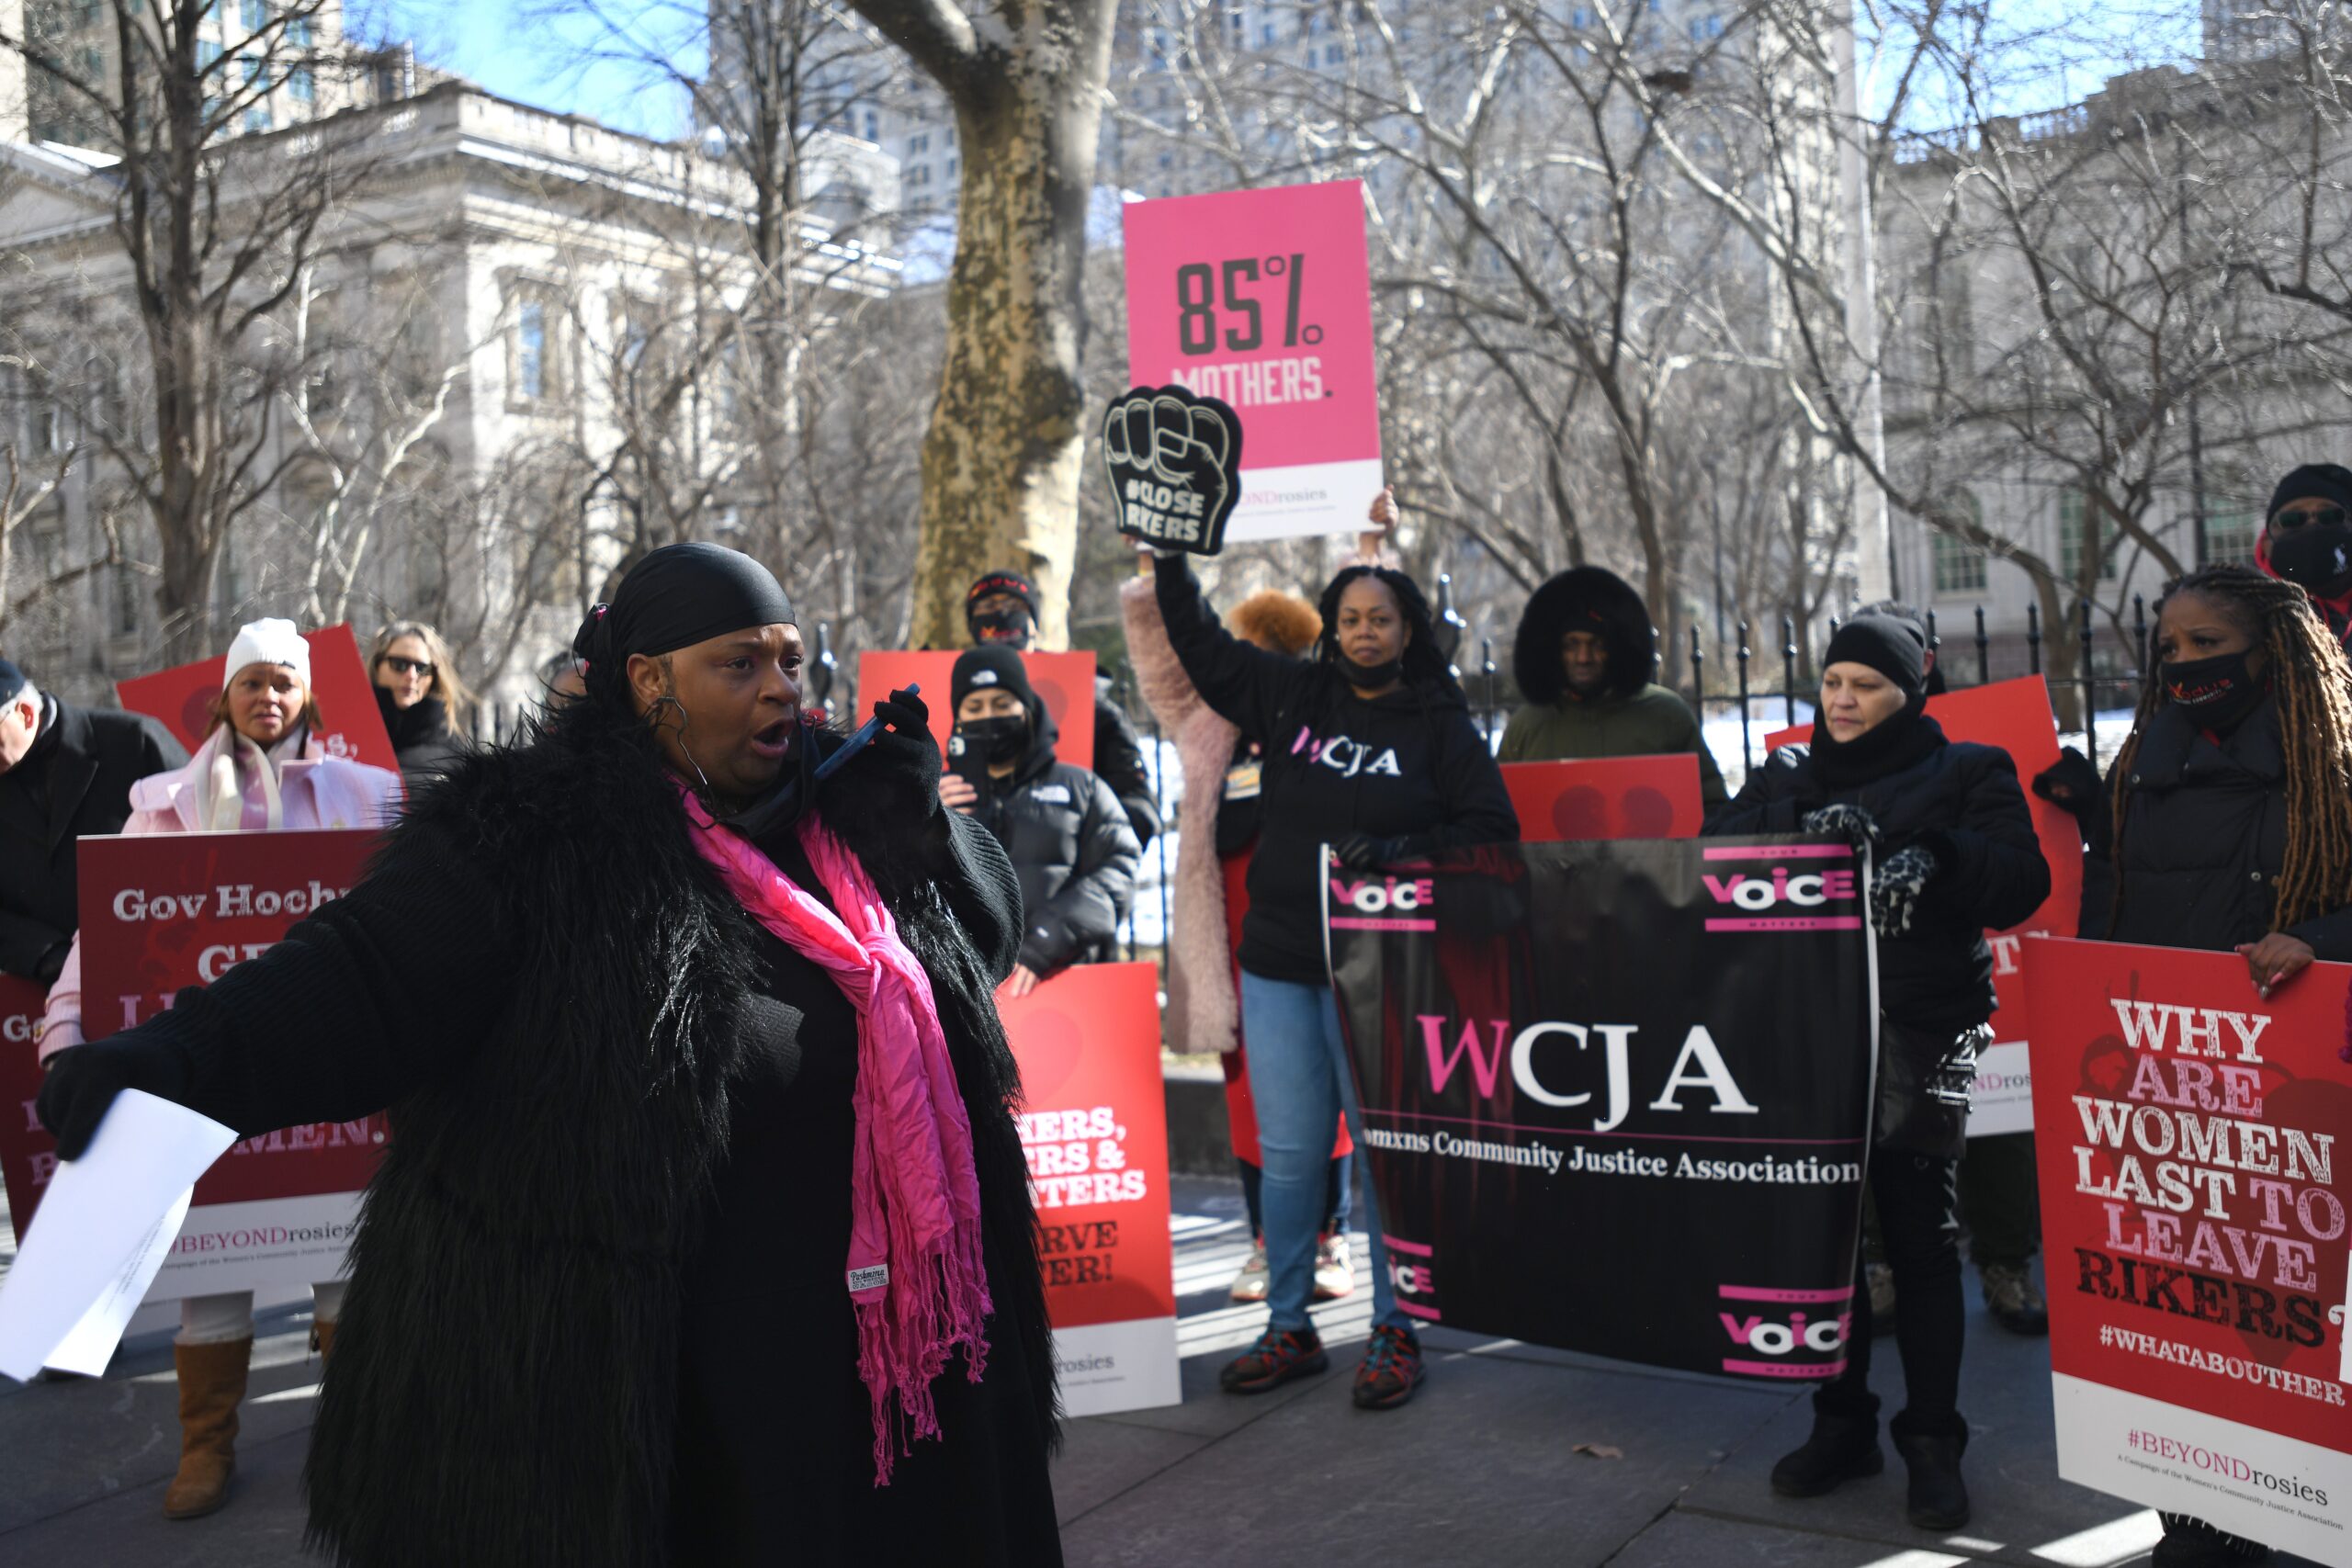 On a cold day in a city park, about a dozen figures stand holding black, red, white, and pink placards, at least two signs reading,